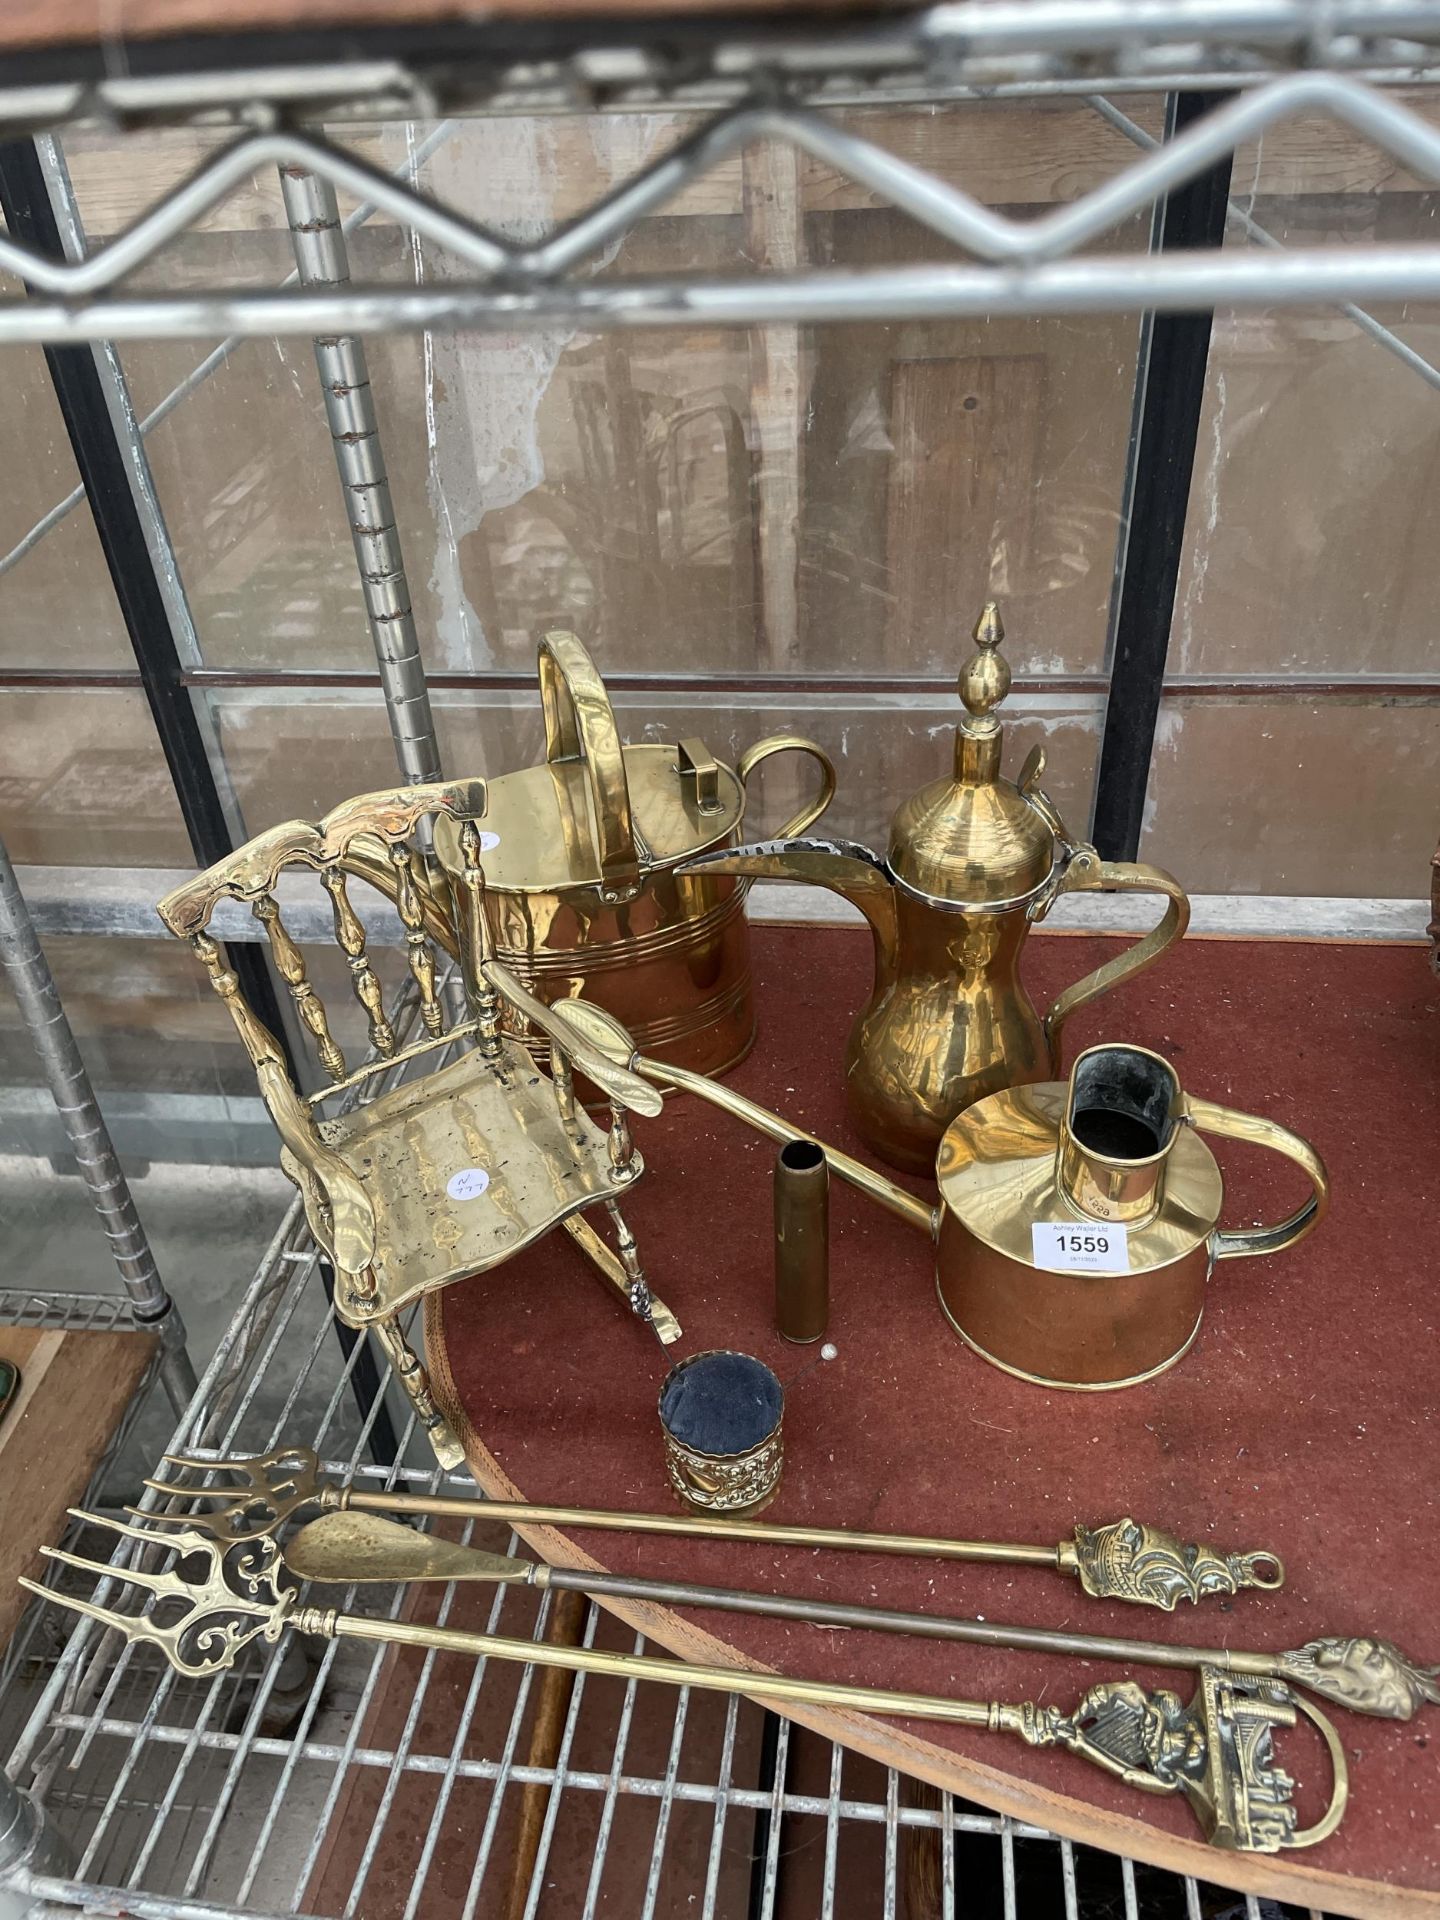 AN ASSORTMENT OF BRASS WARE TO INCLUDE A ROCKING CHAIR, A MIDDLE EASTERN JUG AND A WATERING CAN ETC